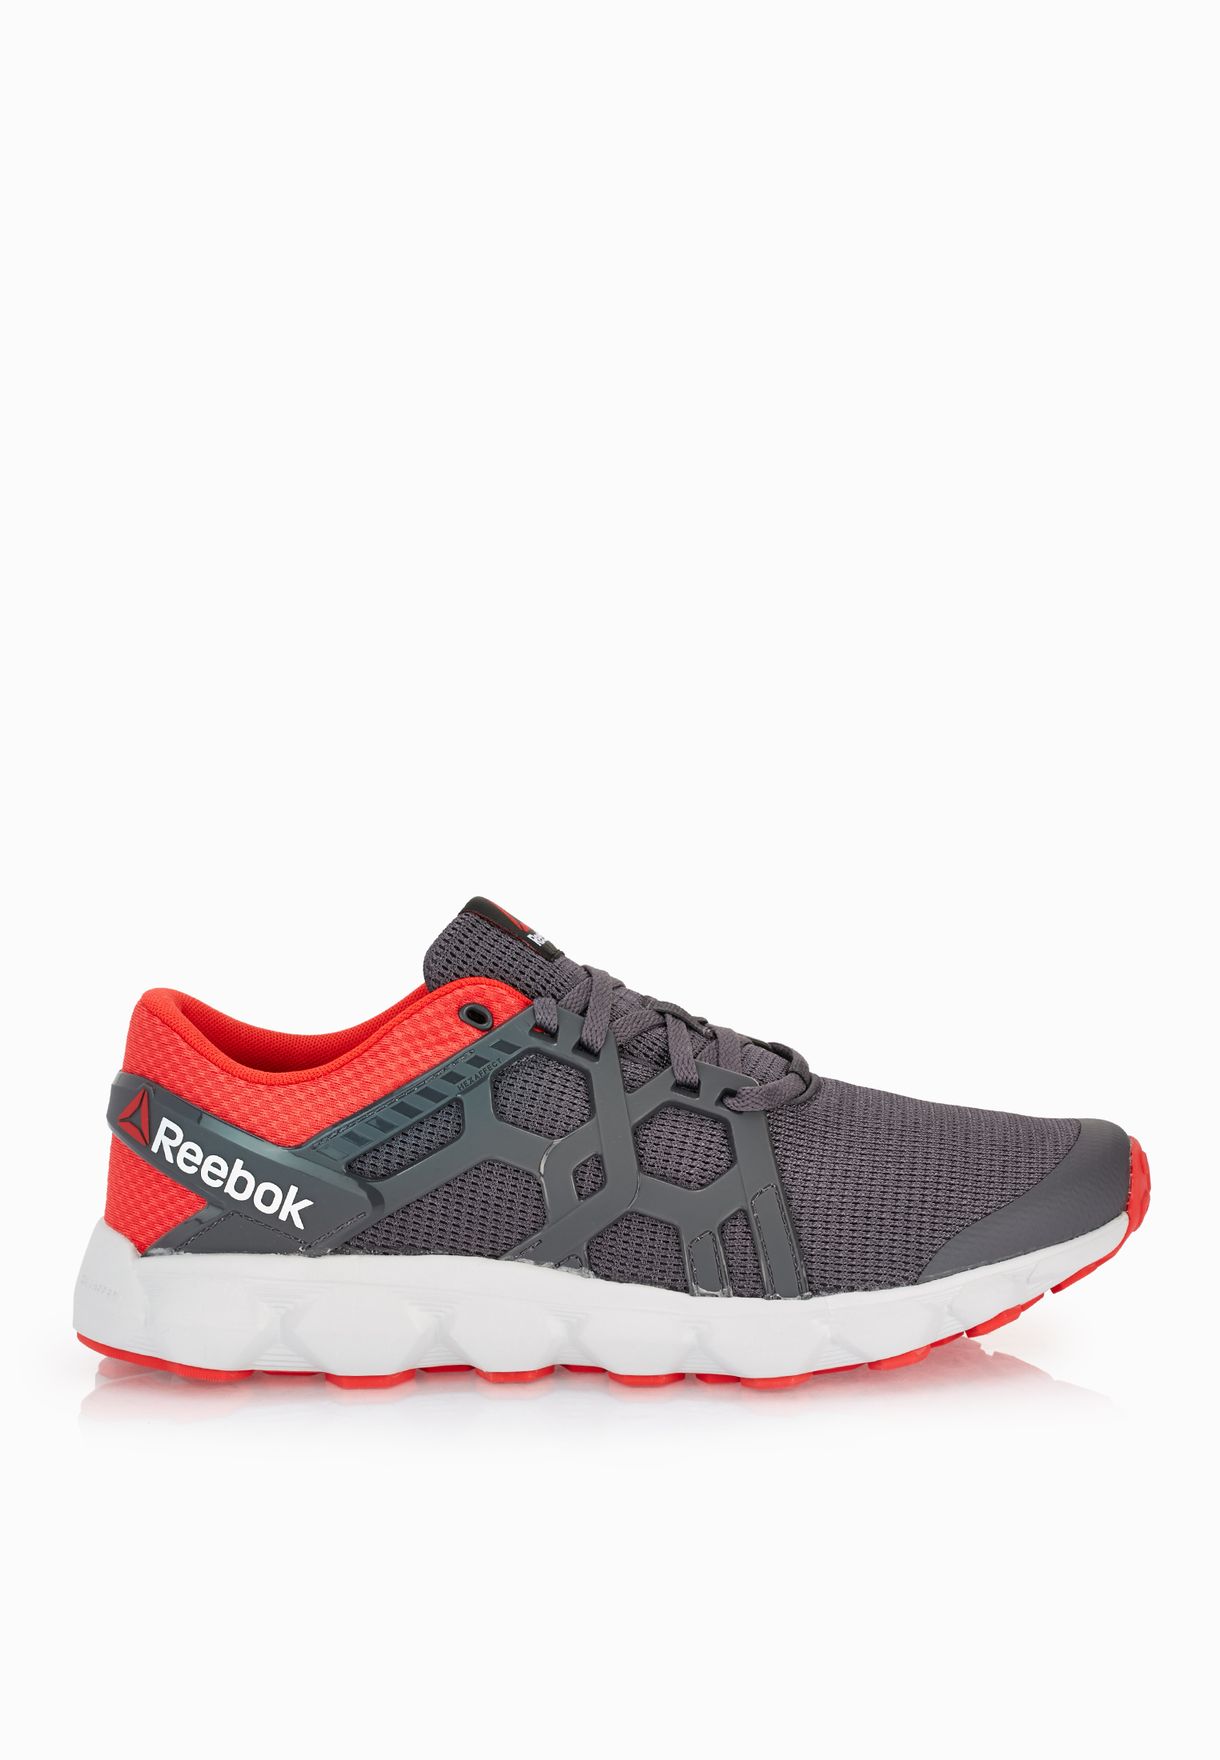 reebok shoes models with price in uae 